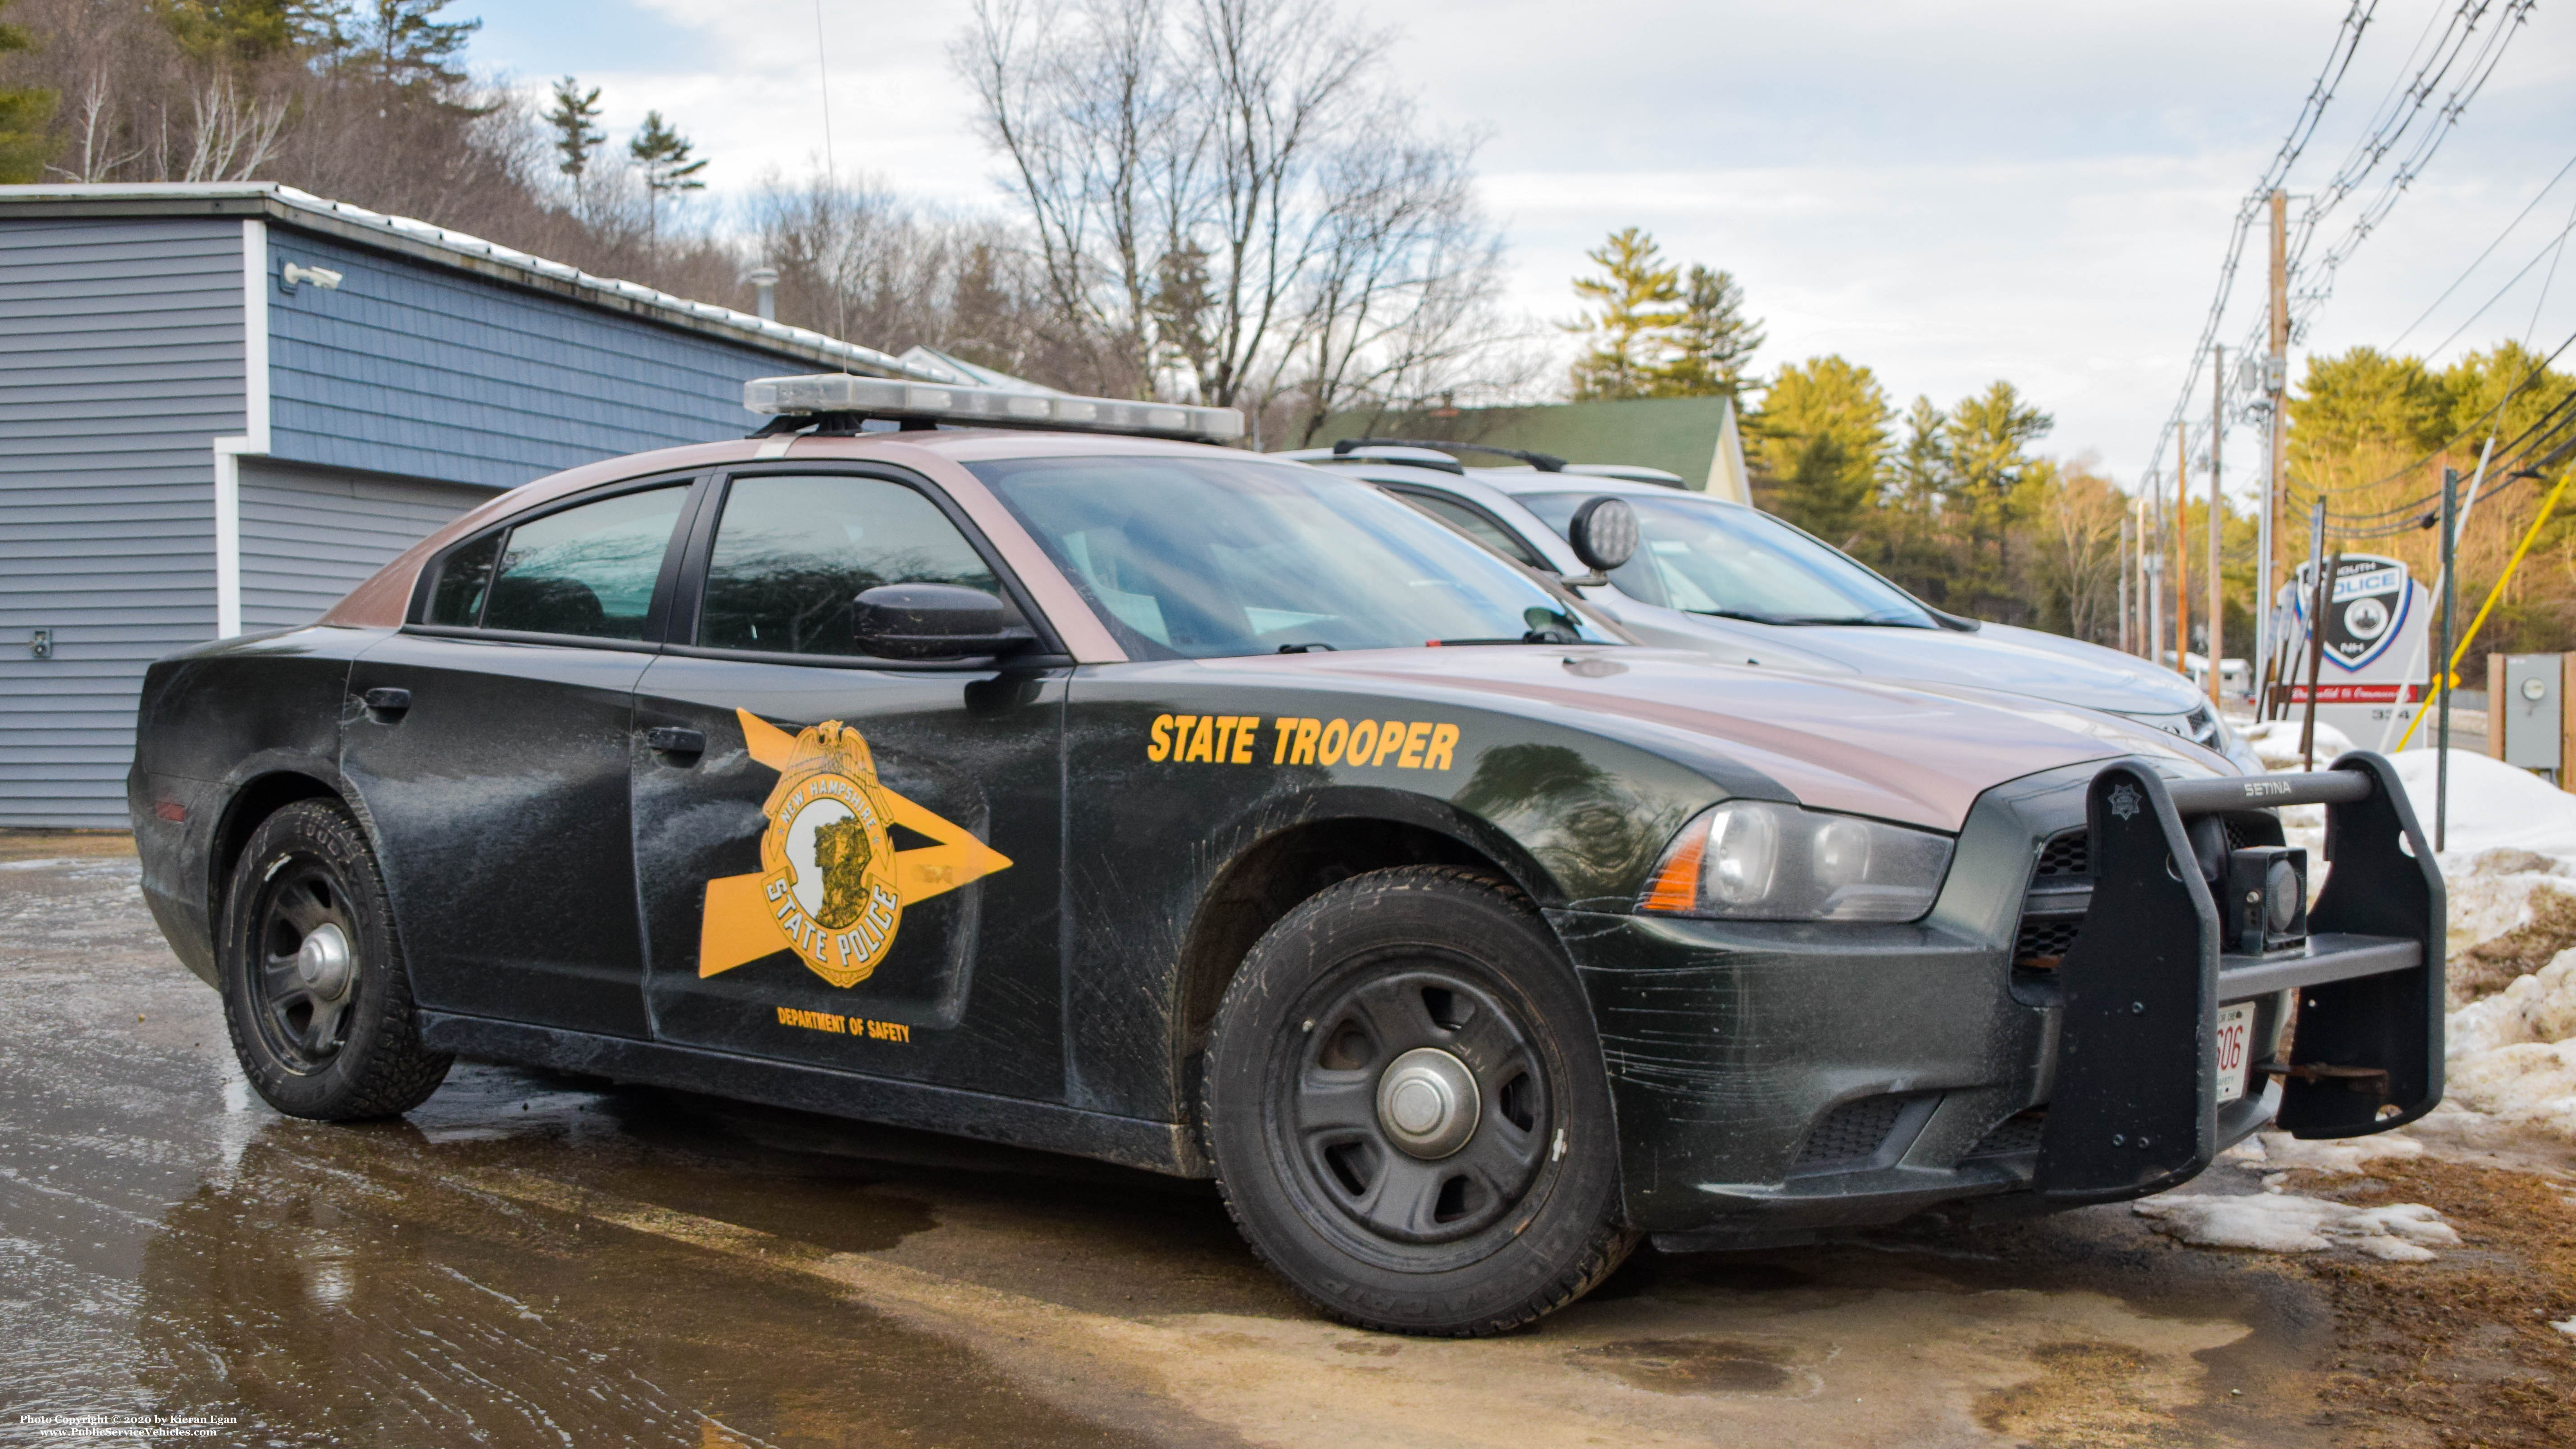 A photo  of New Hampshire State Police
            Cruiser 606, a 2011-2013 Dodge Charger             taken by Kieran Egan